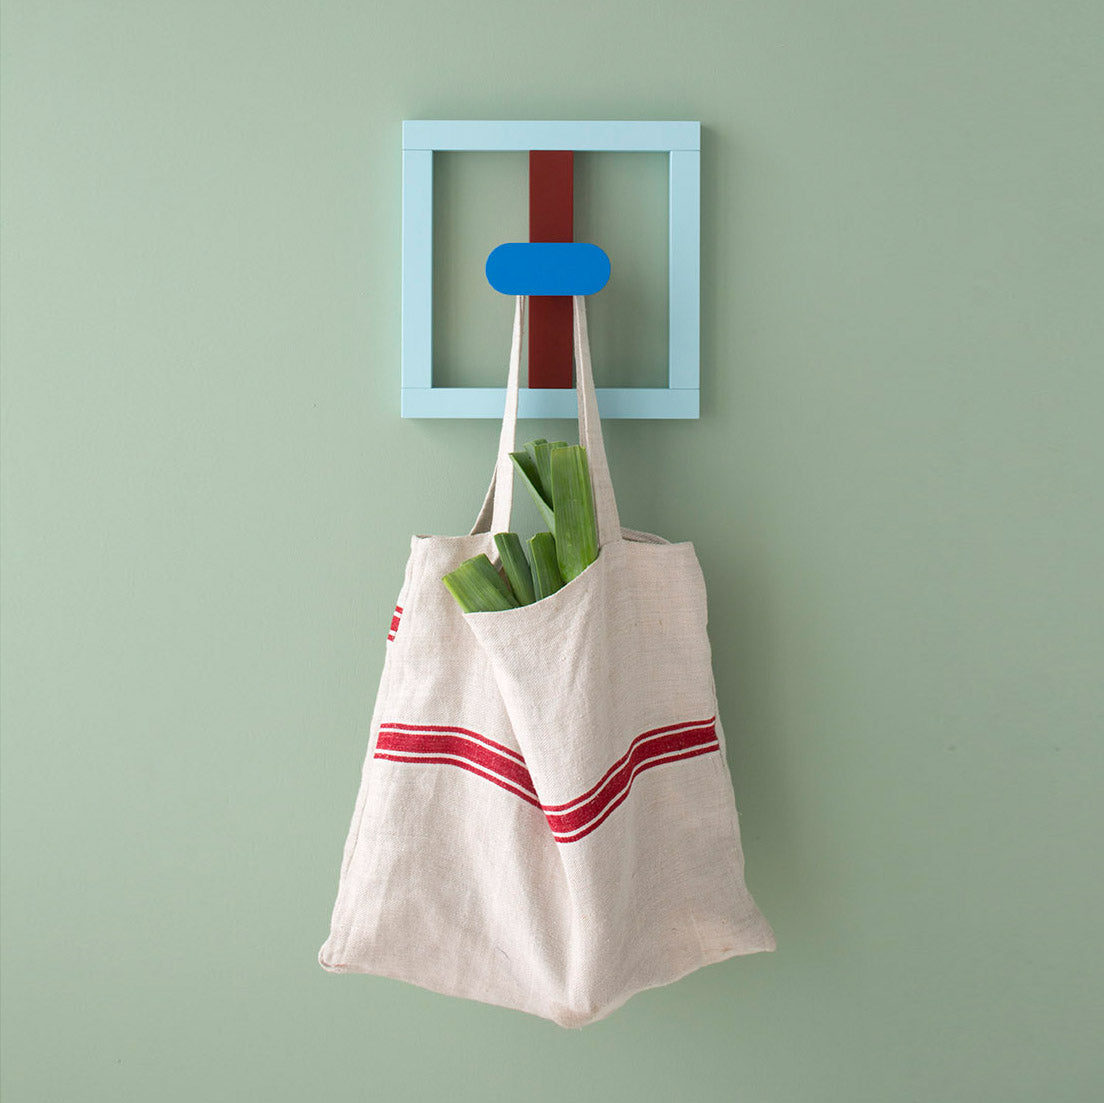 Raawii Hooks Coat Rack by Nathalie Du Pasquier - Small – MoMA Design Store